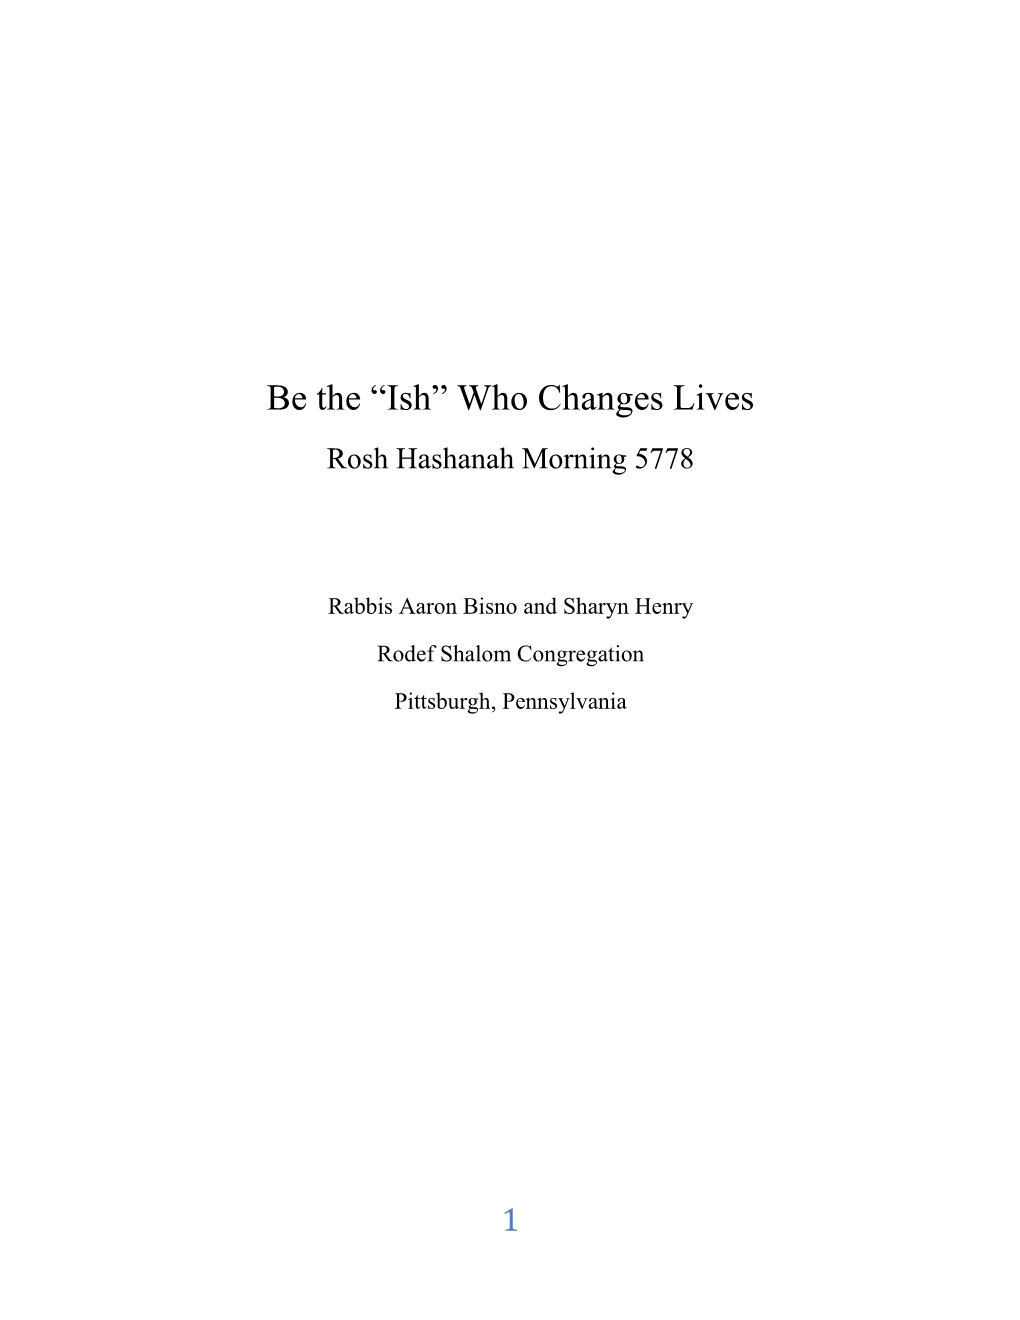 Be the “Ish” Who Changes Lives Rosh Hashanah Morning 5778